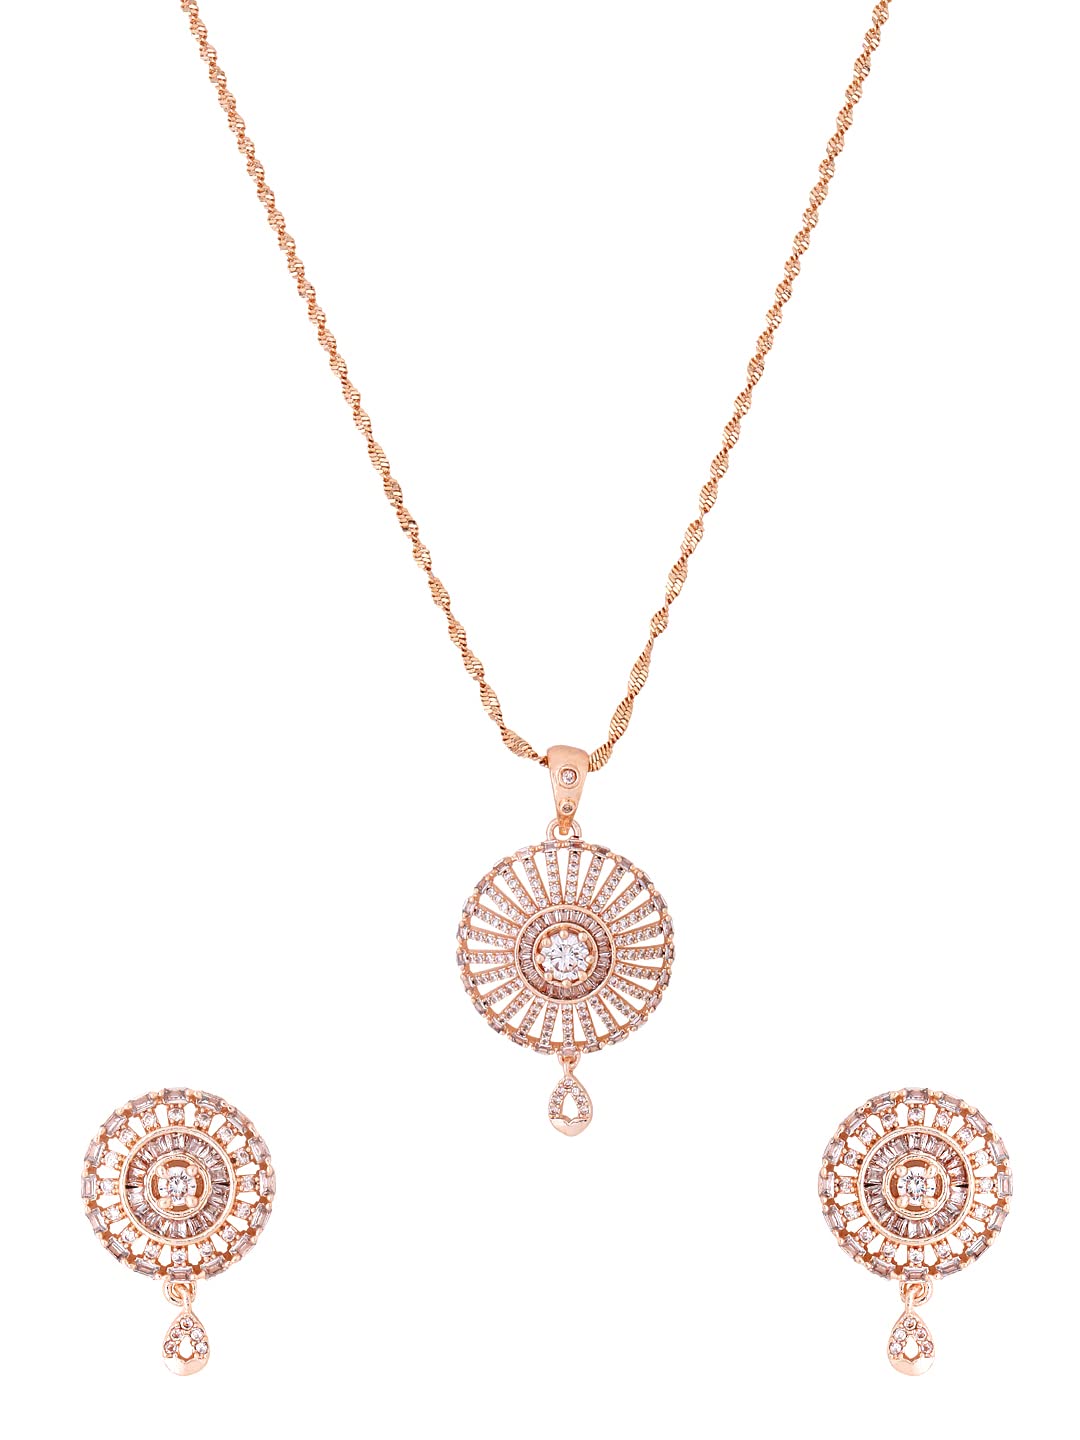 Yellow Chimes Pendant Set for Women and Girls Traditional Rosegold American Diamond Pendant Set for Girls | Rose Gold Plated AD Pendant and Earrings Set | Birthday Gift for girls and women Anniversary Gift for Wife